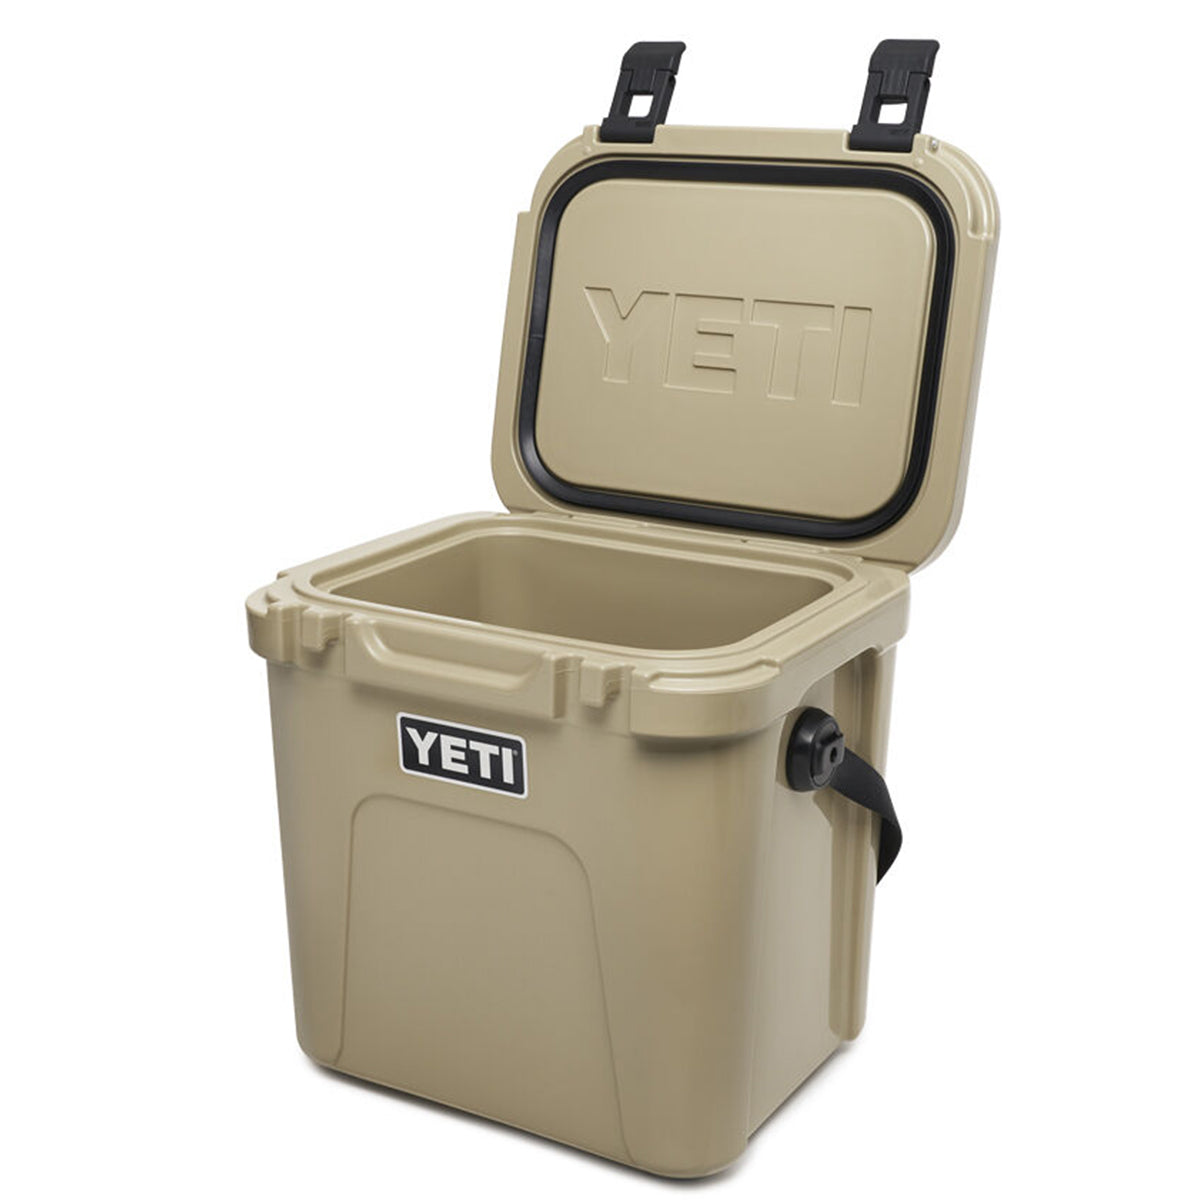 I Tested the Famous Yeti Roadie 24 Cooler, and I Loved It! (With Pictures)